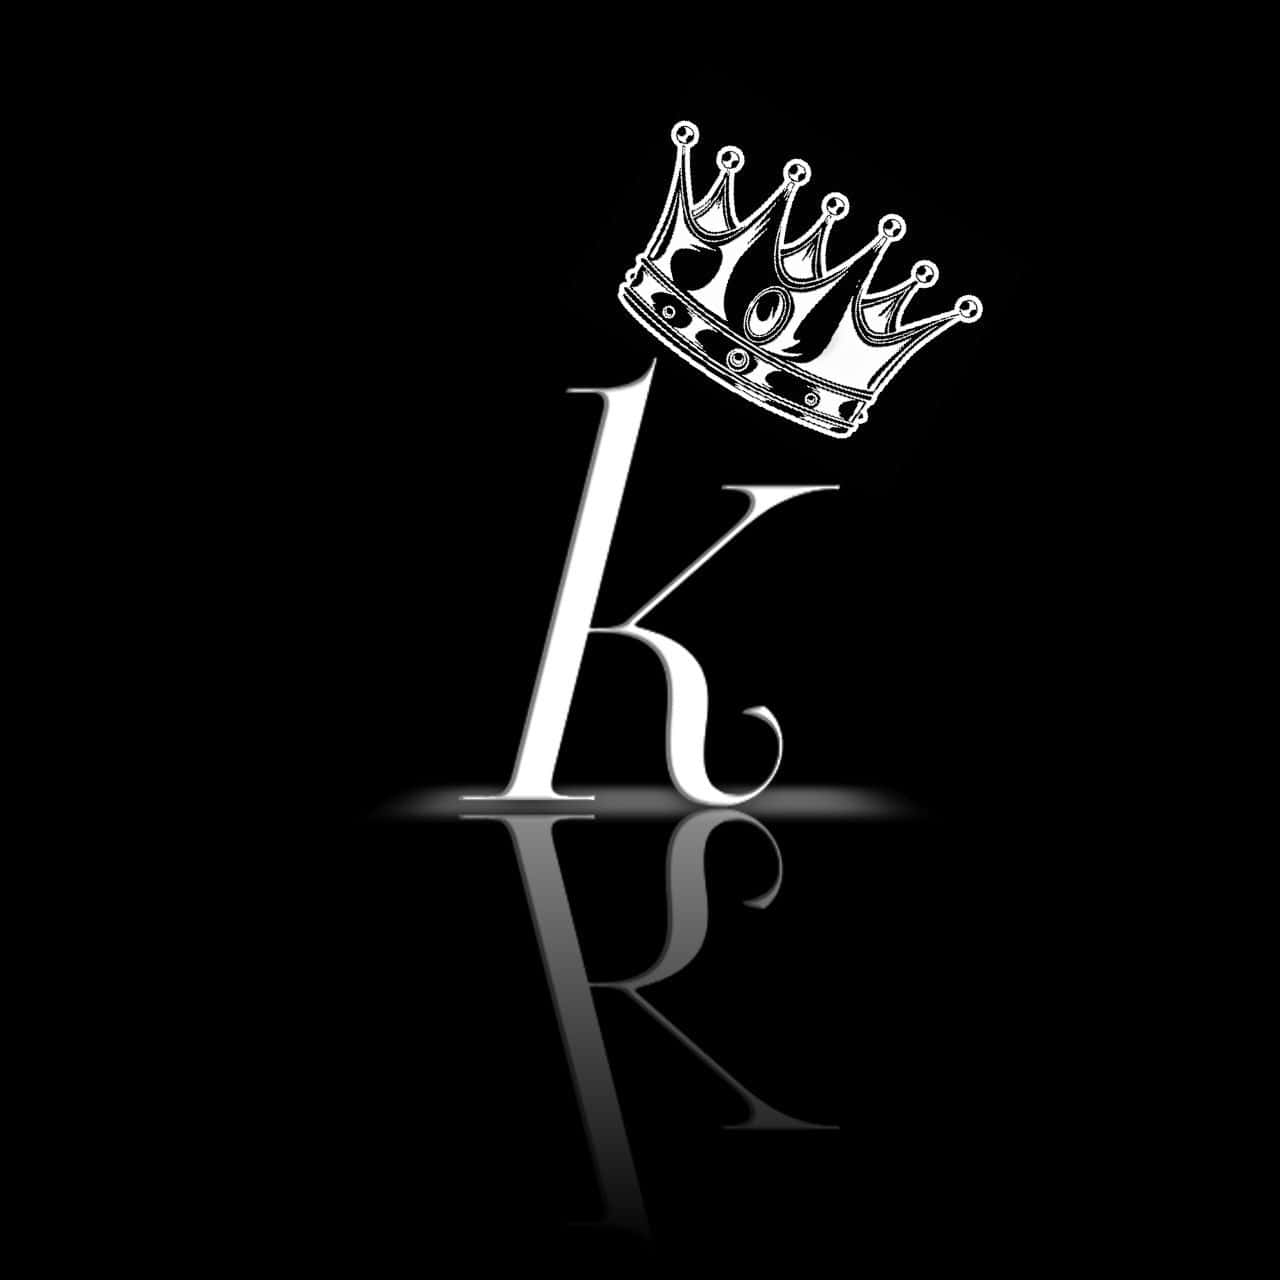 A Black And White Logo With A Crown On It